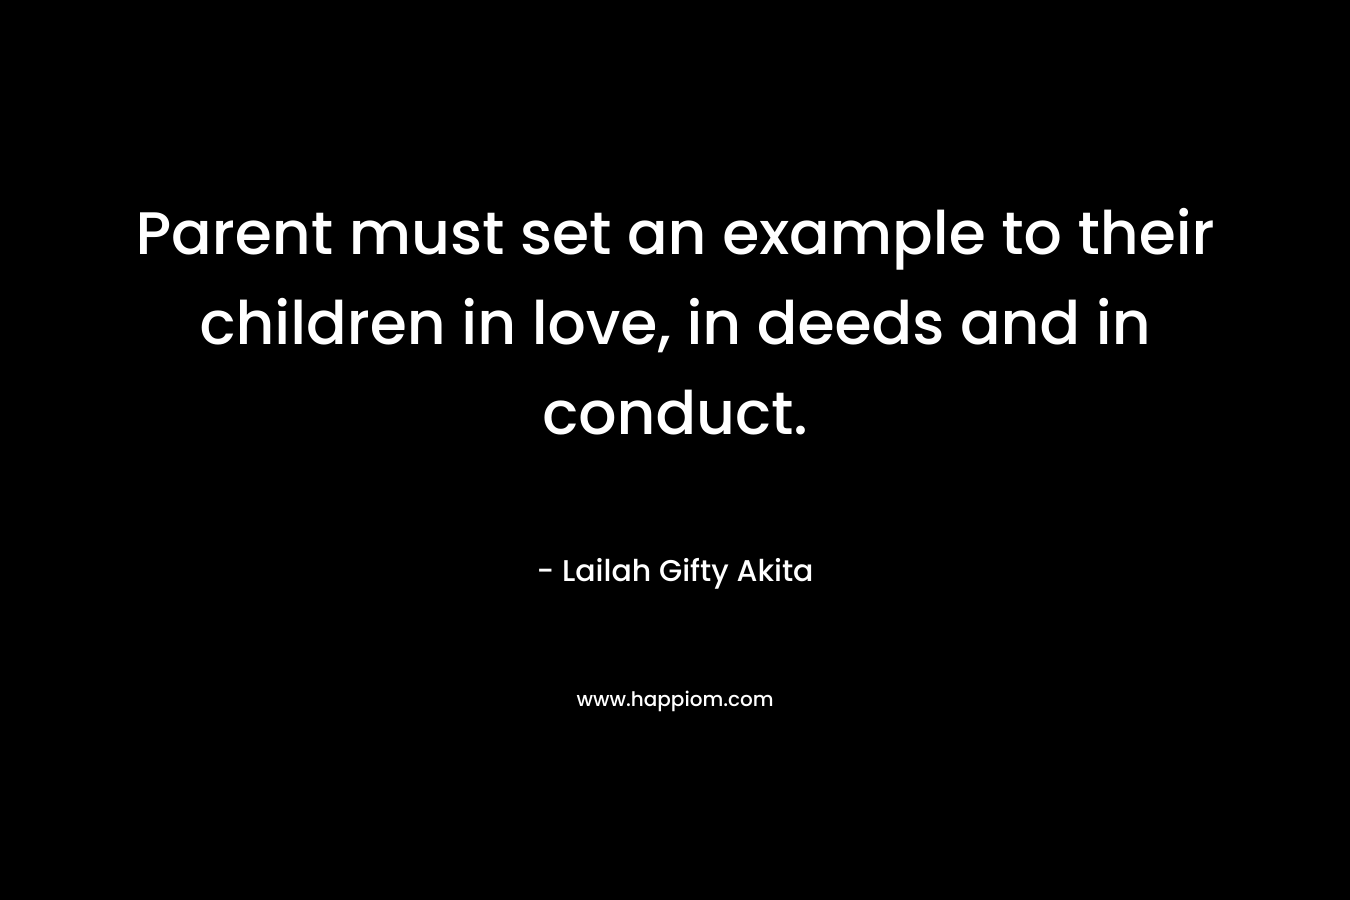 Parent must set an example to their children in love, in deeds and in conduct.